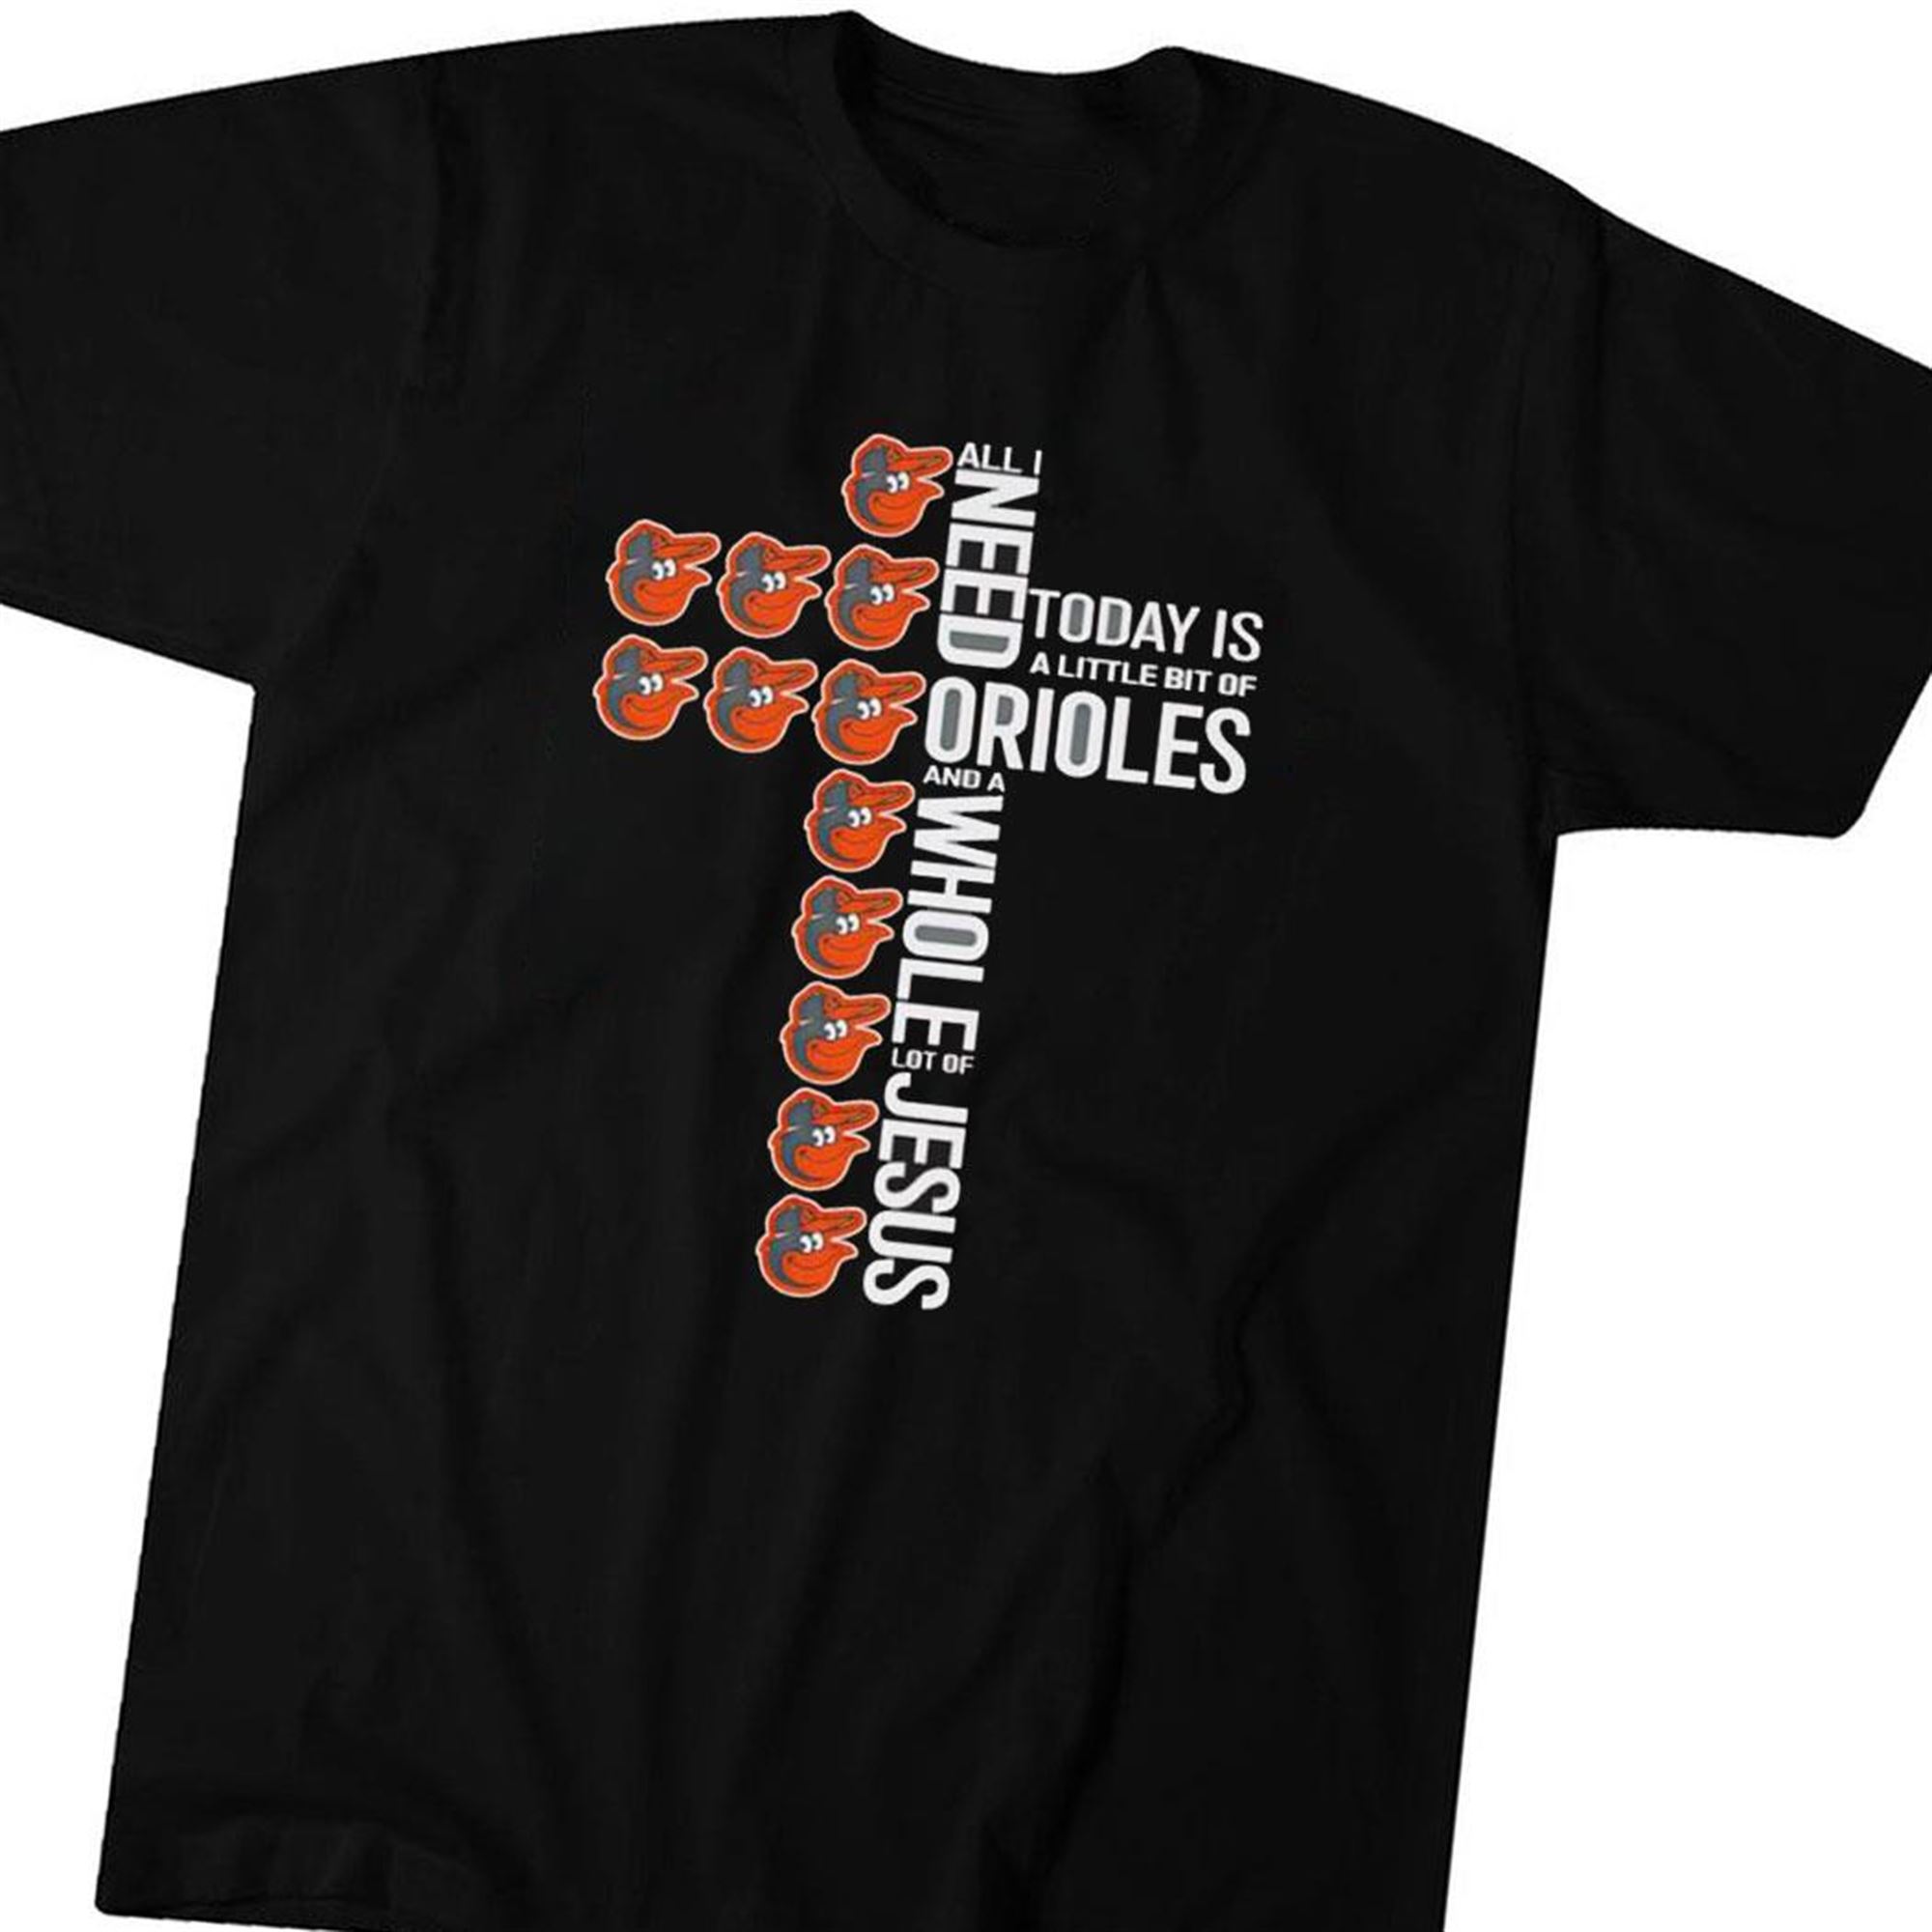 Official Cross All I Need Today Is A Little Bit Of Baltimore Orioles Shirt Ladies Tee